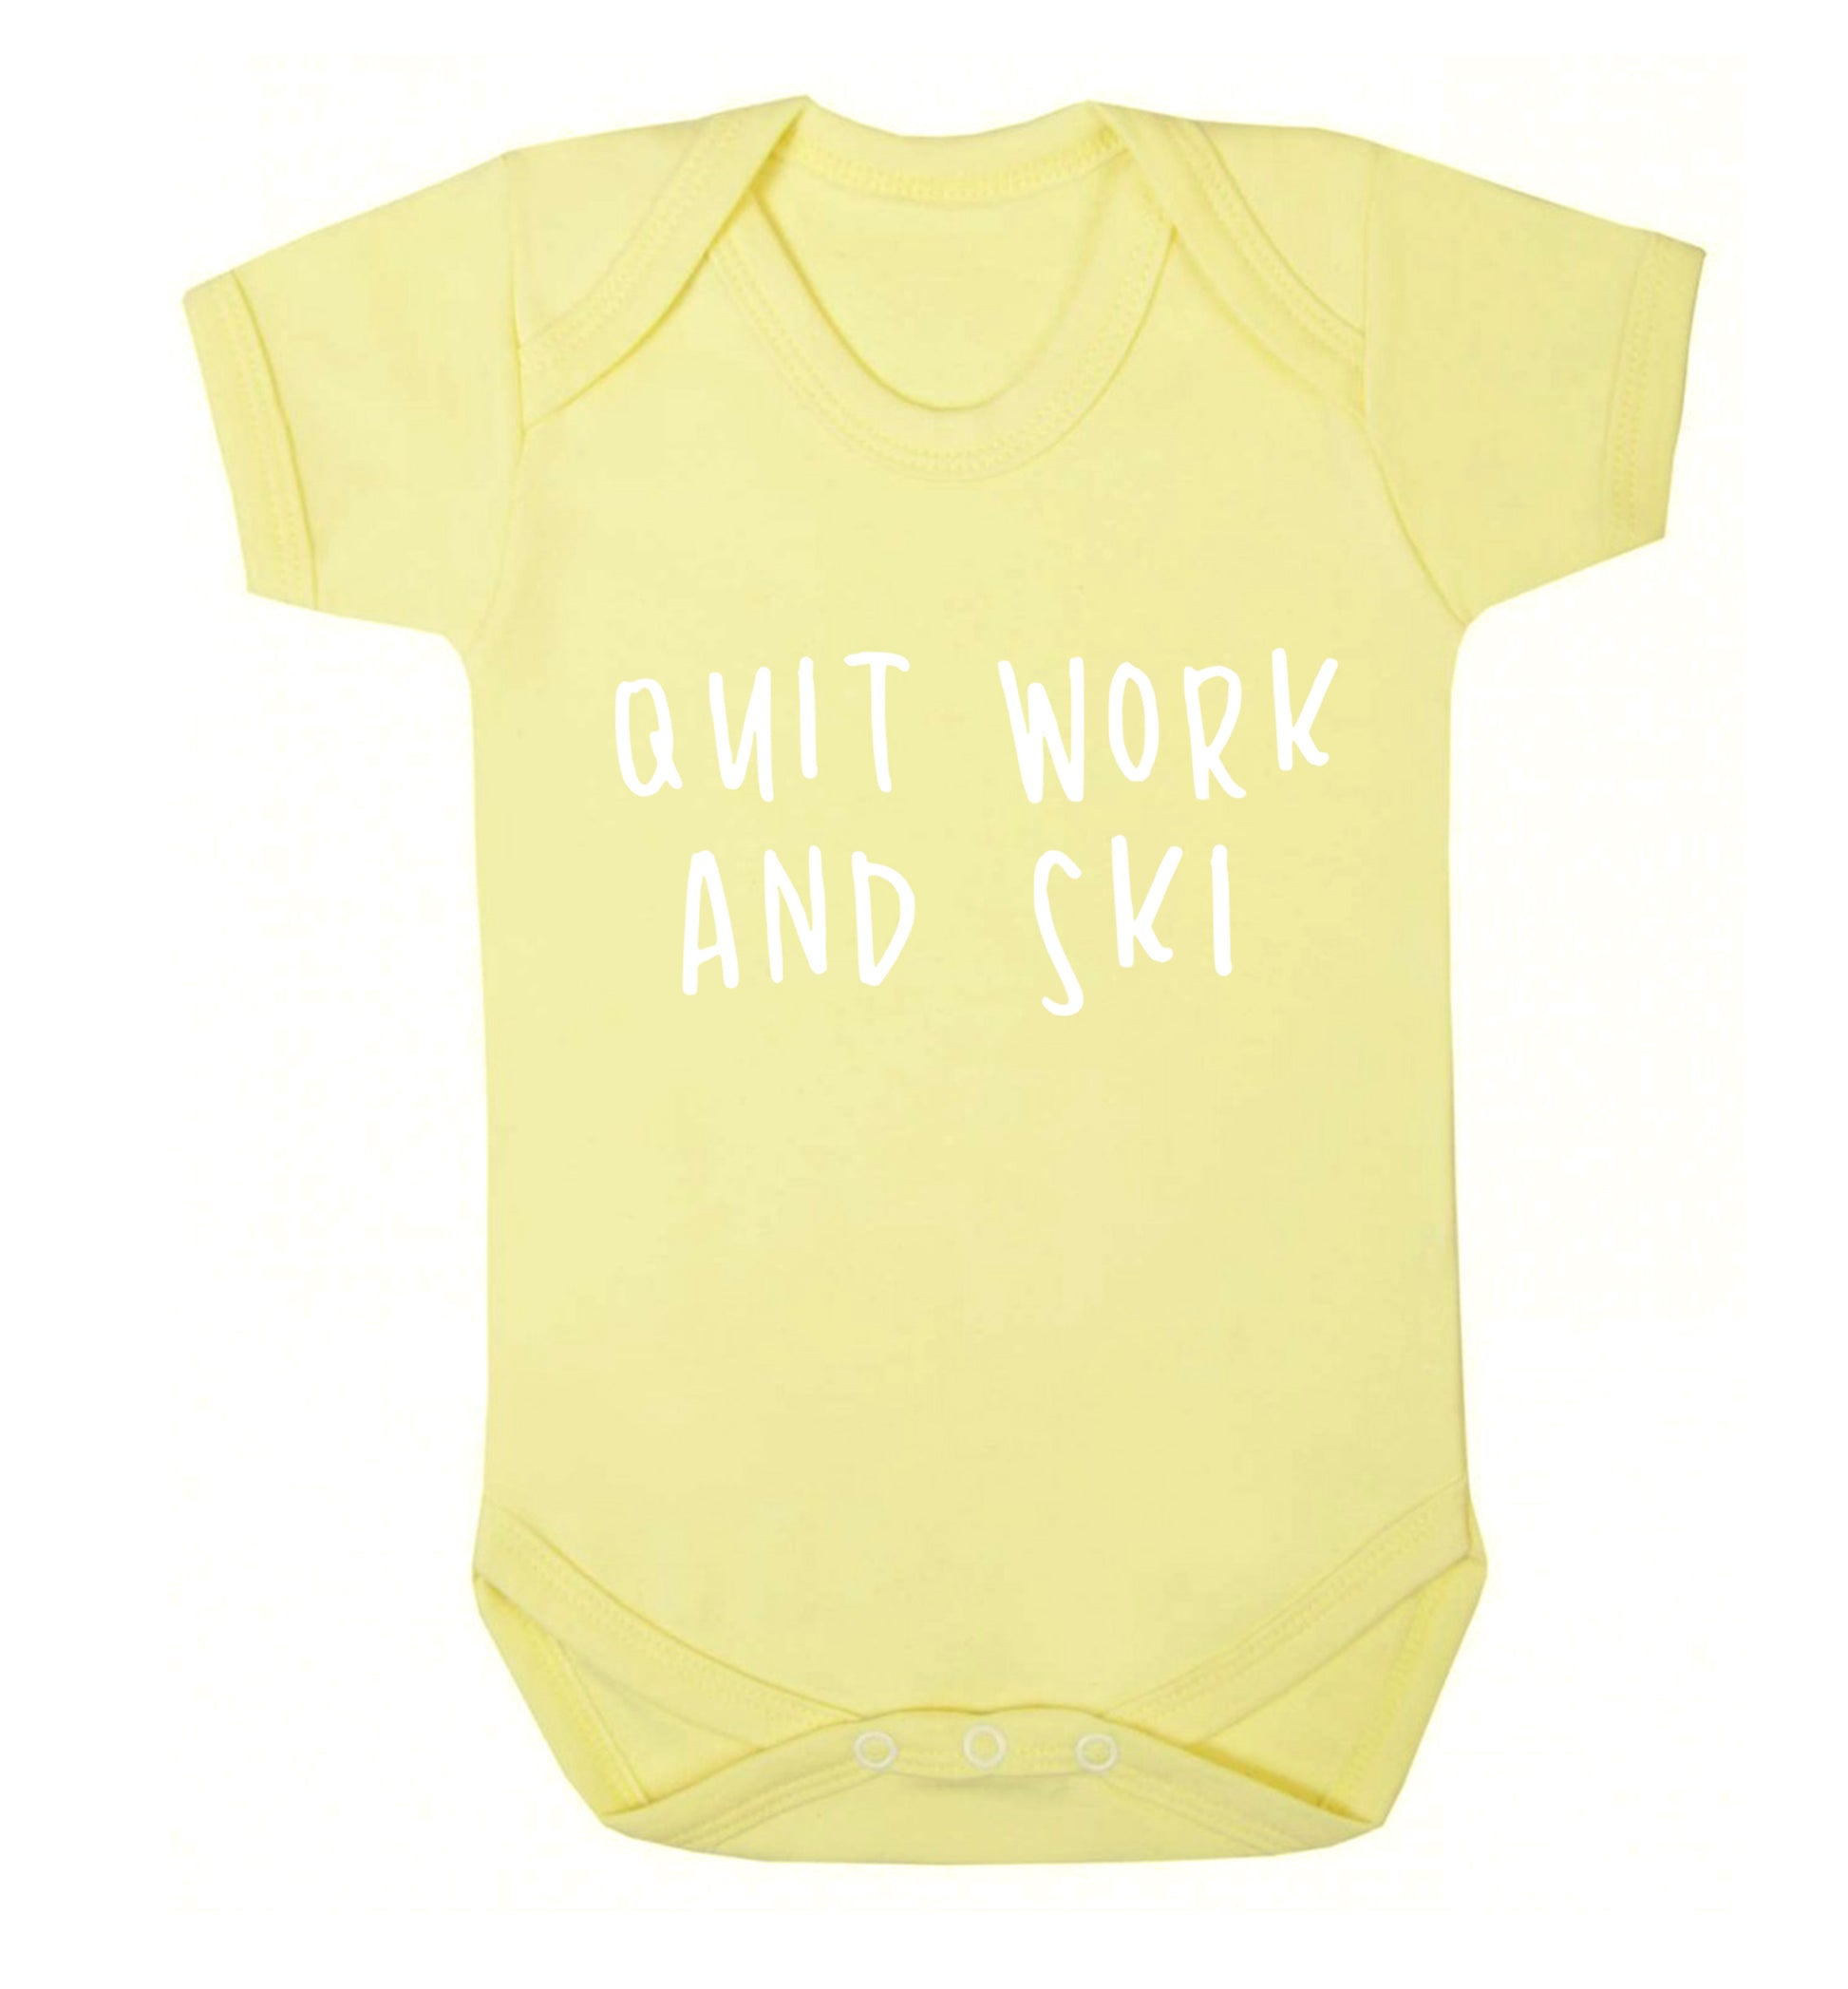 Quit work and ski Baby Vest pale yellow 18-24 months